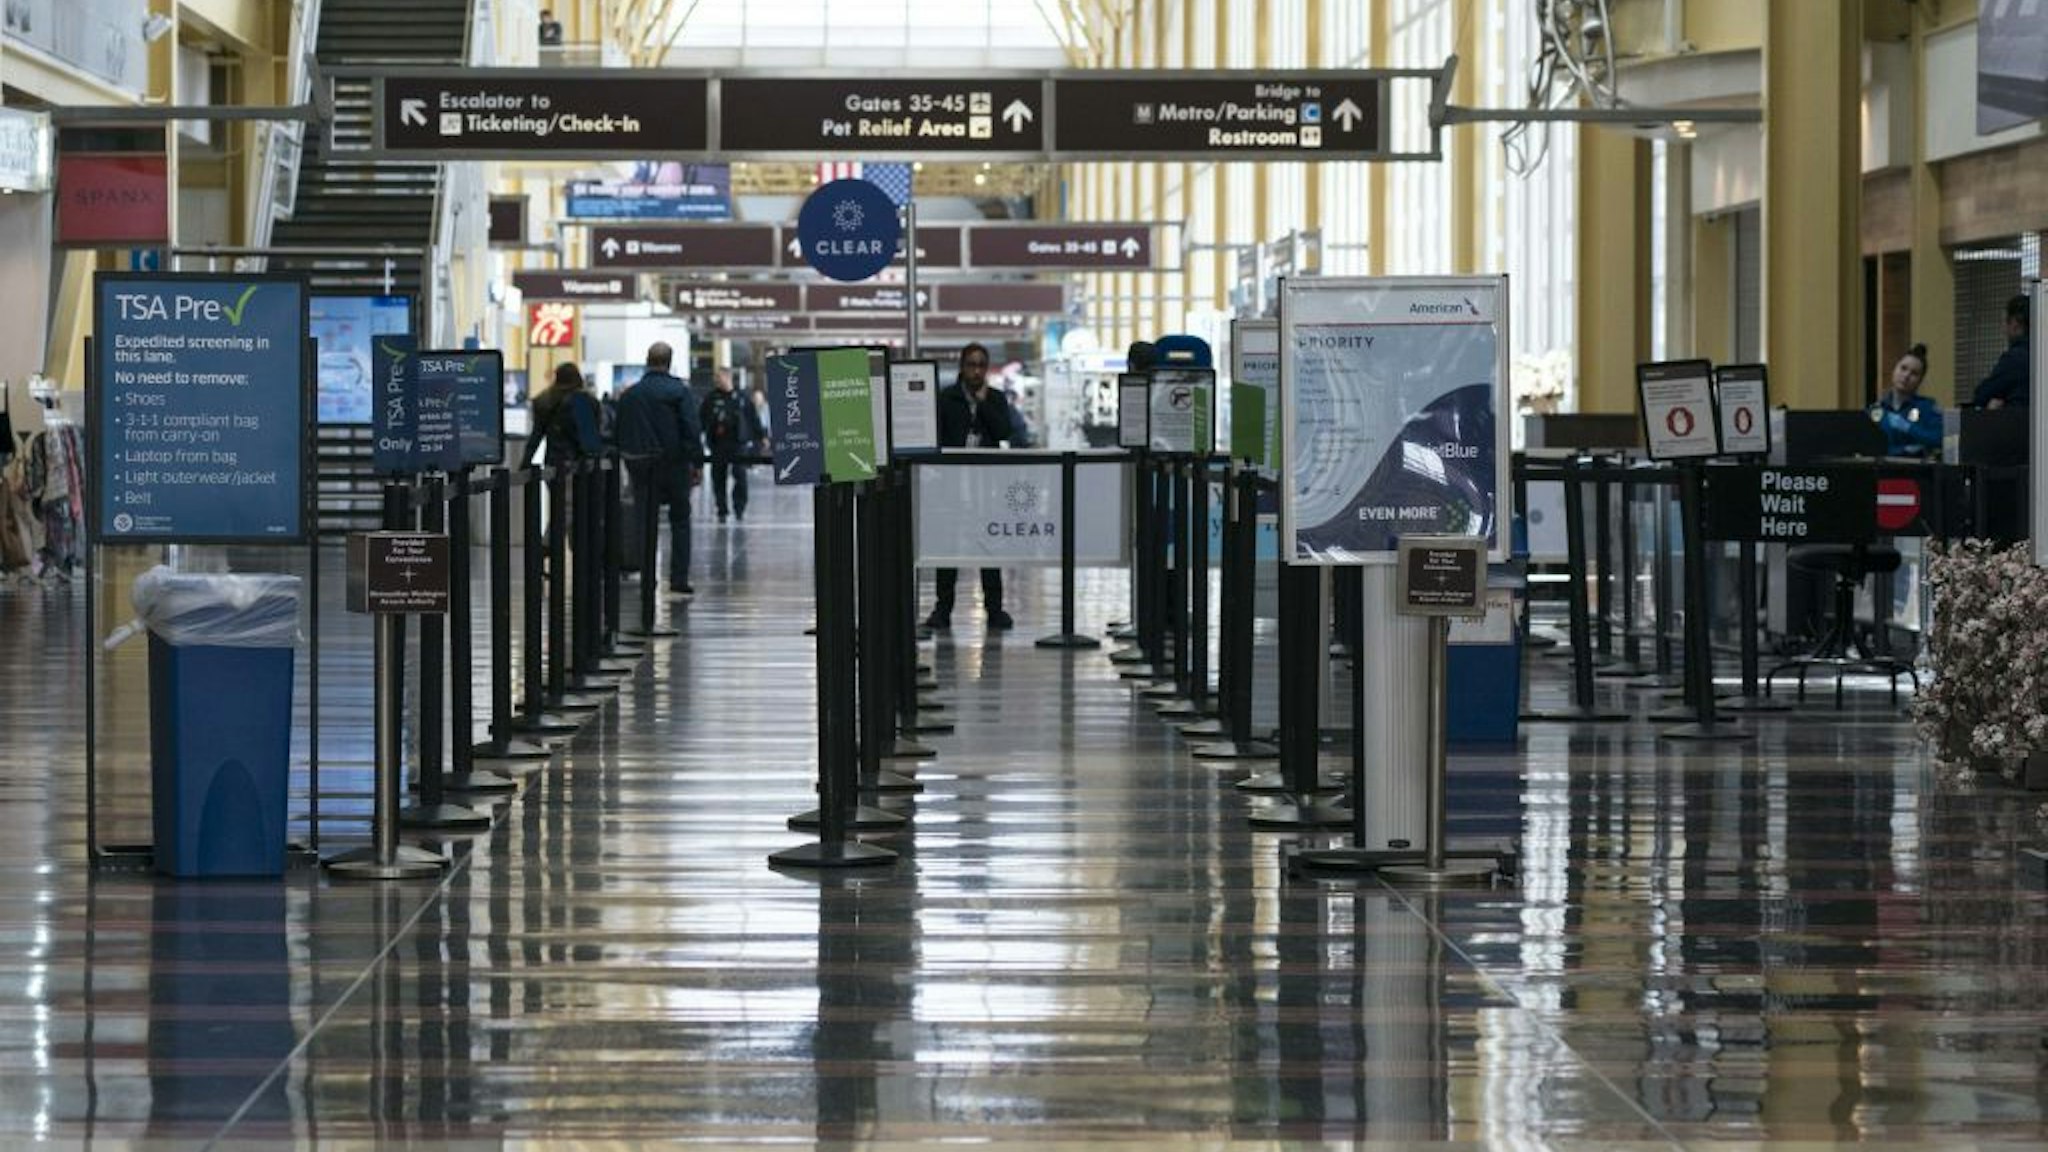 The TSA line is seen nearly empty at Ronald Reagan National Airport (DCA) in Arlington, Virginia, U.S., on Monday, March 16, 2020. The airline industry, ravaged by plummeting bookings due to the coronavirus, is seeking grants and loans totaling as much as $58 billion from the U.S. government as well as temporary relief from various taxes.